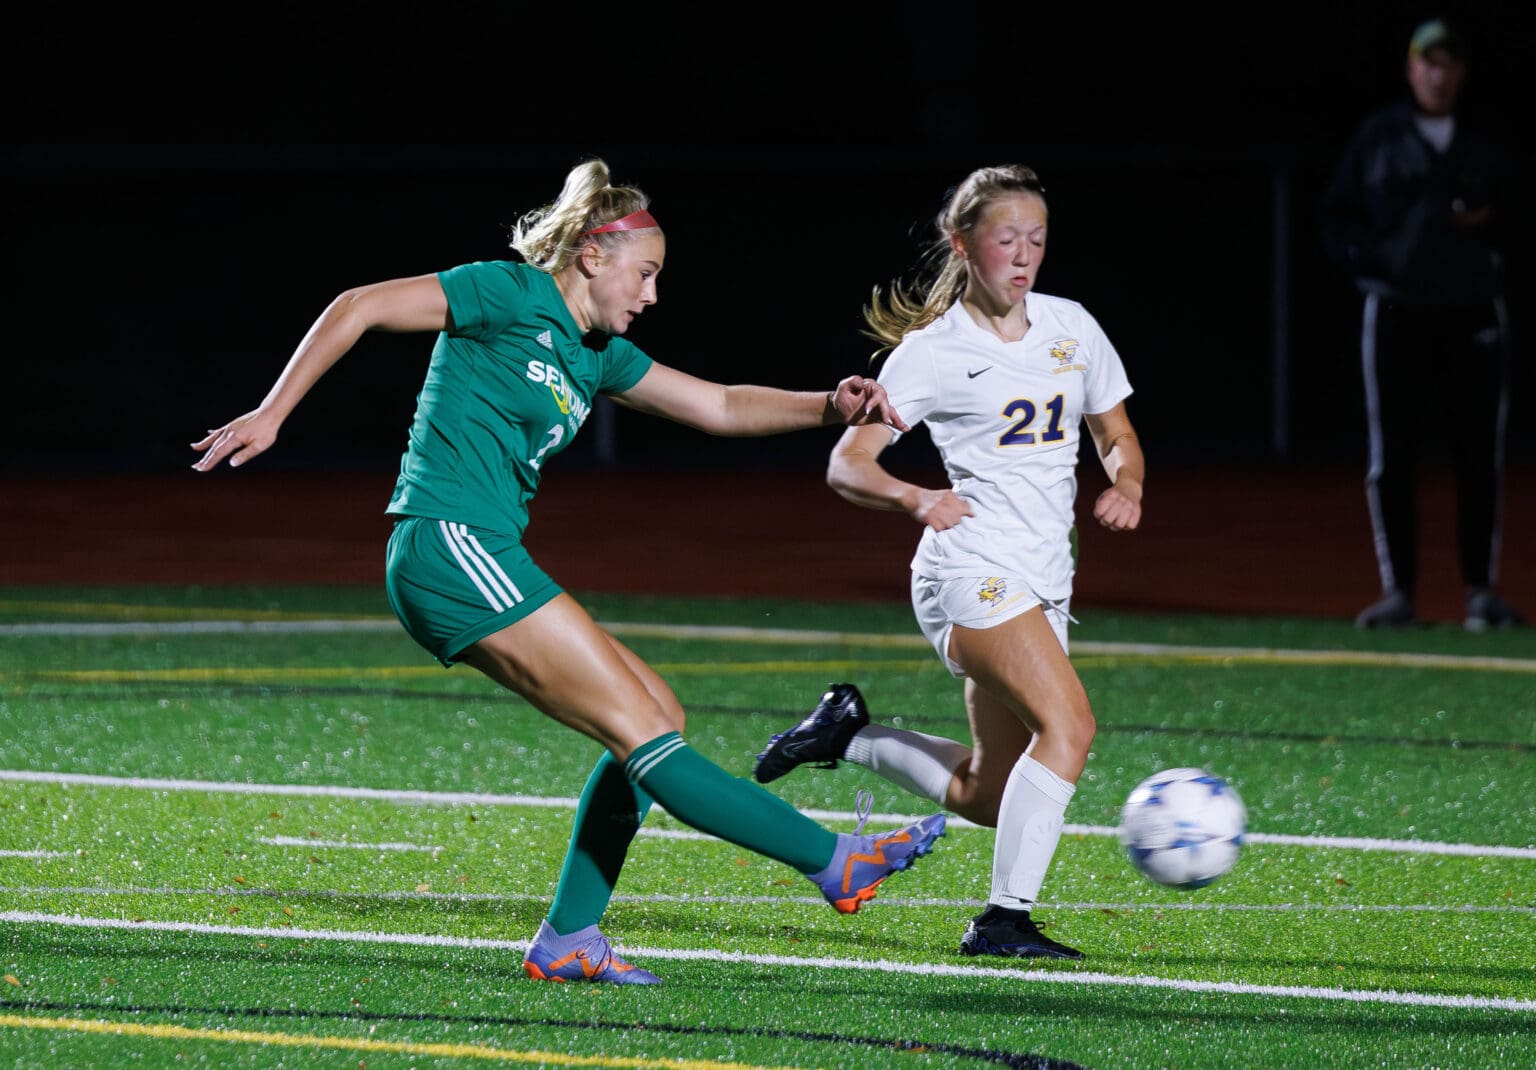 Sehome’s Evelyn Sherwood kicks the ball as another player tries to take control of the ball.